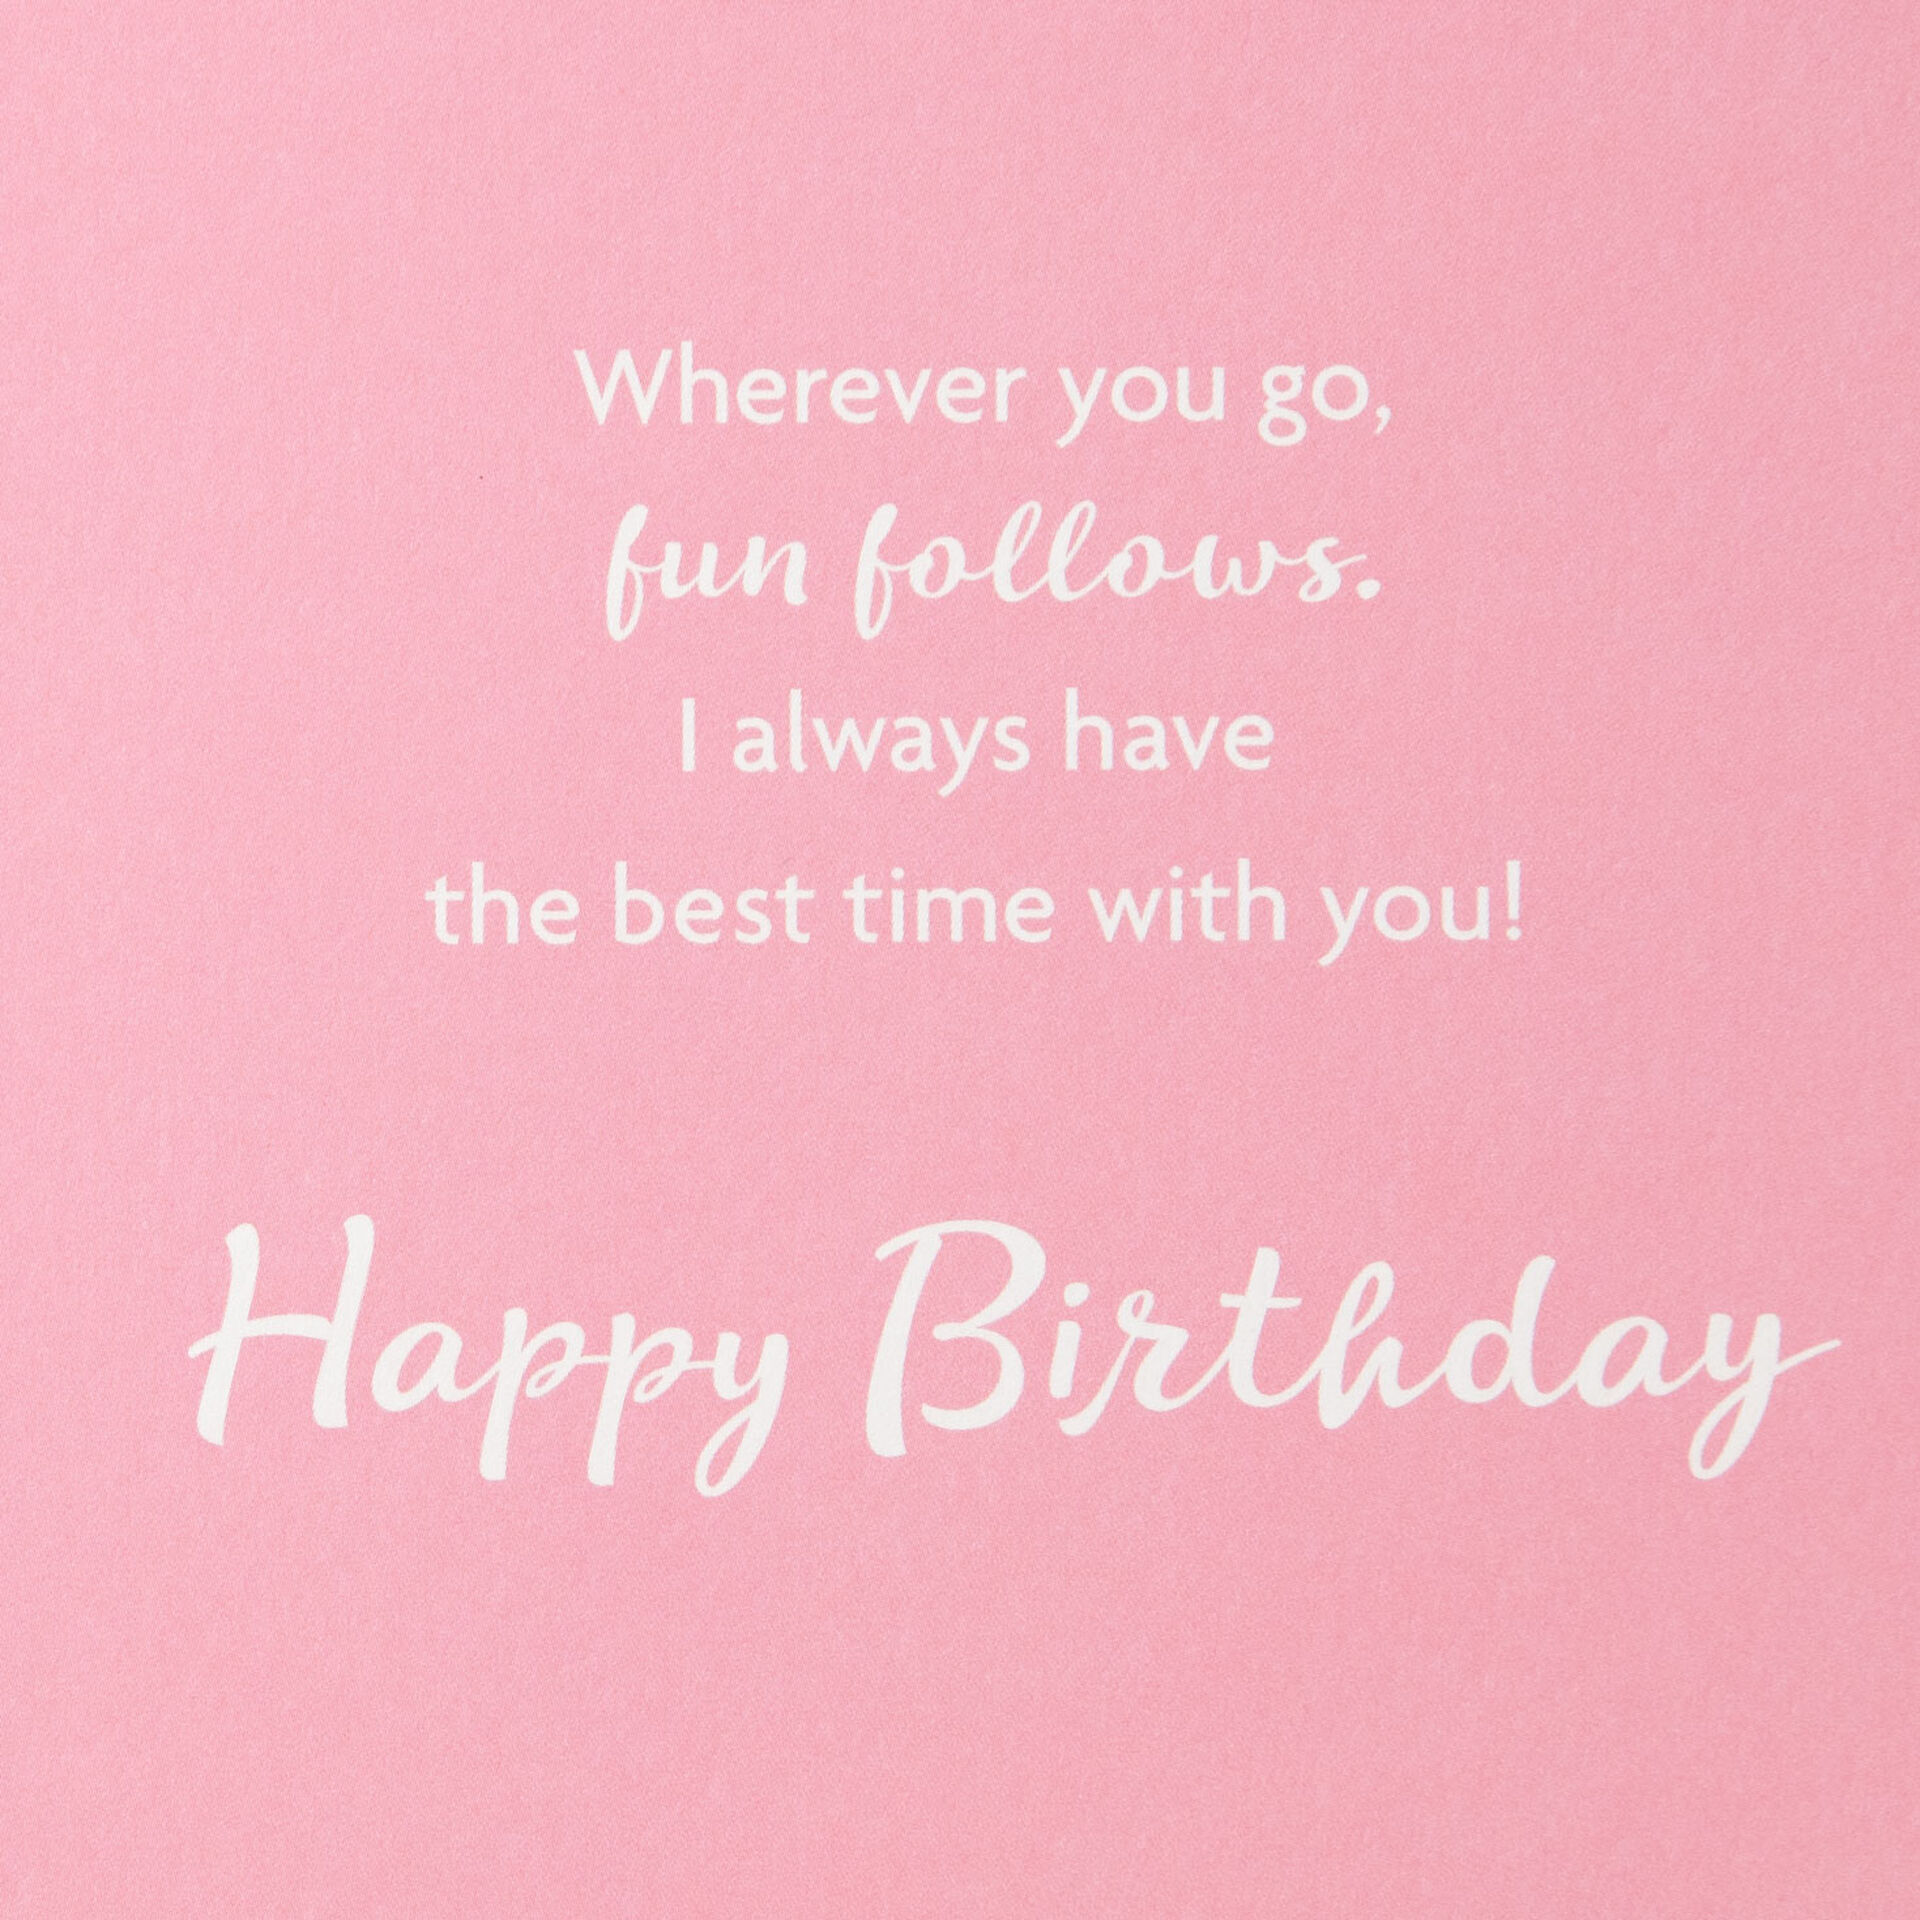 Friend-Pool-Floats-Birthday-Card-for-Her_299HBD3810_02